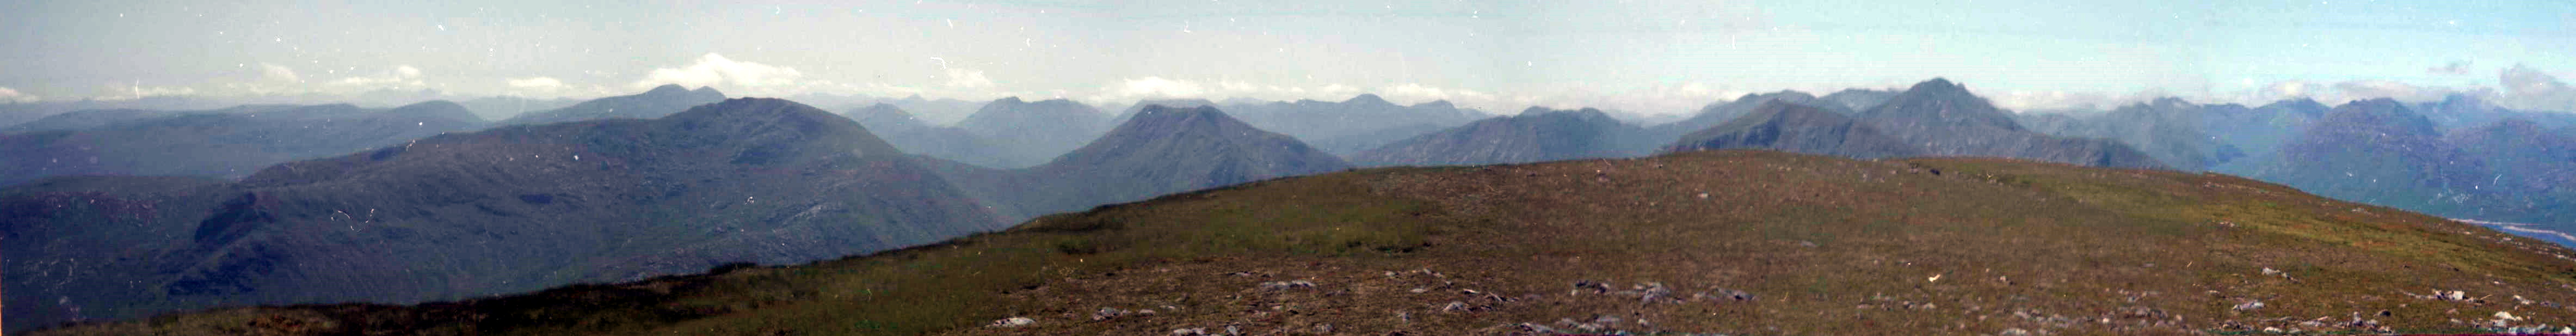 Panorama of the hills of Knoydart to the south of Gairich